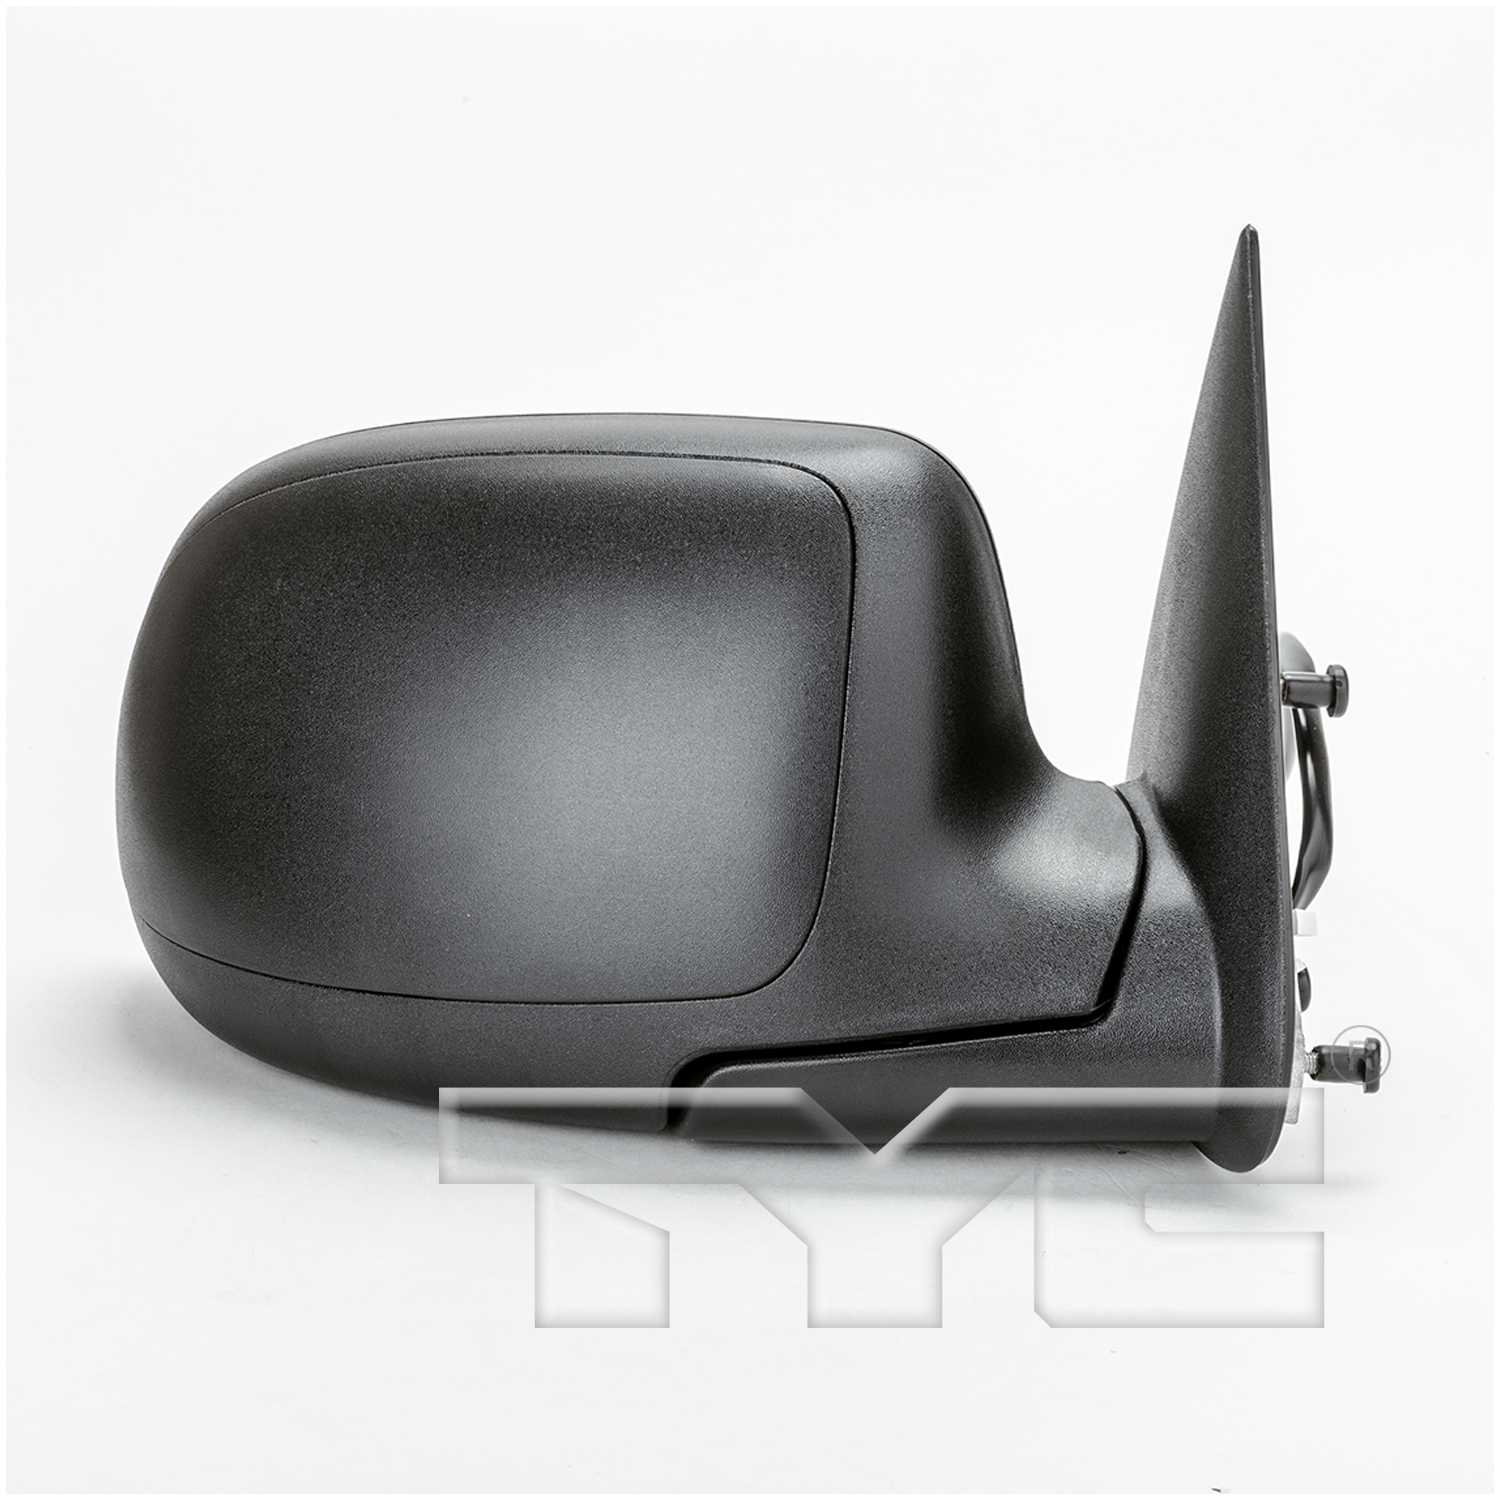 Aftermarket MIRRORS for CHEVROLET - TAHOE, TAHOE,03-06,RT Mirror outside rear view